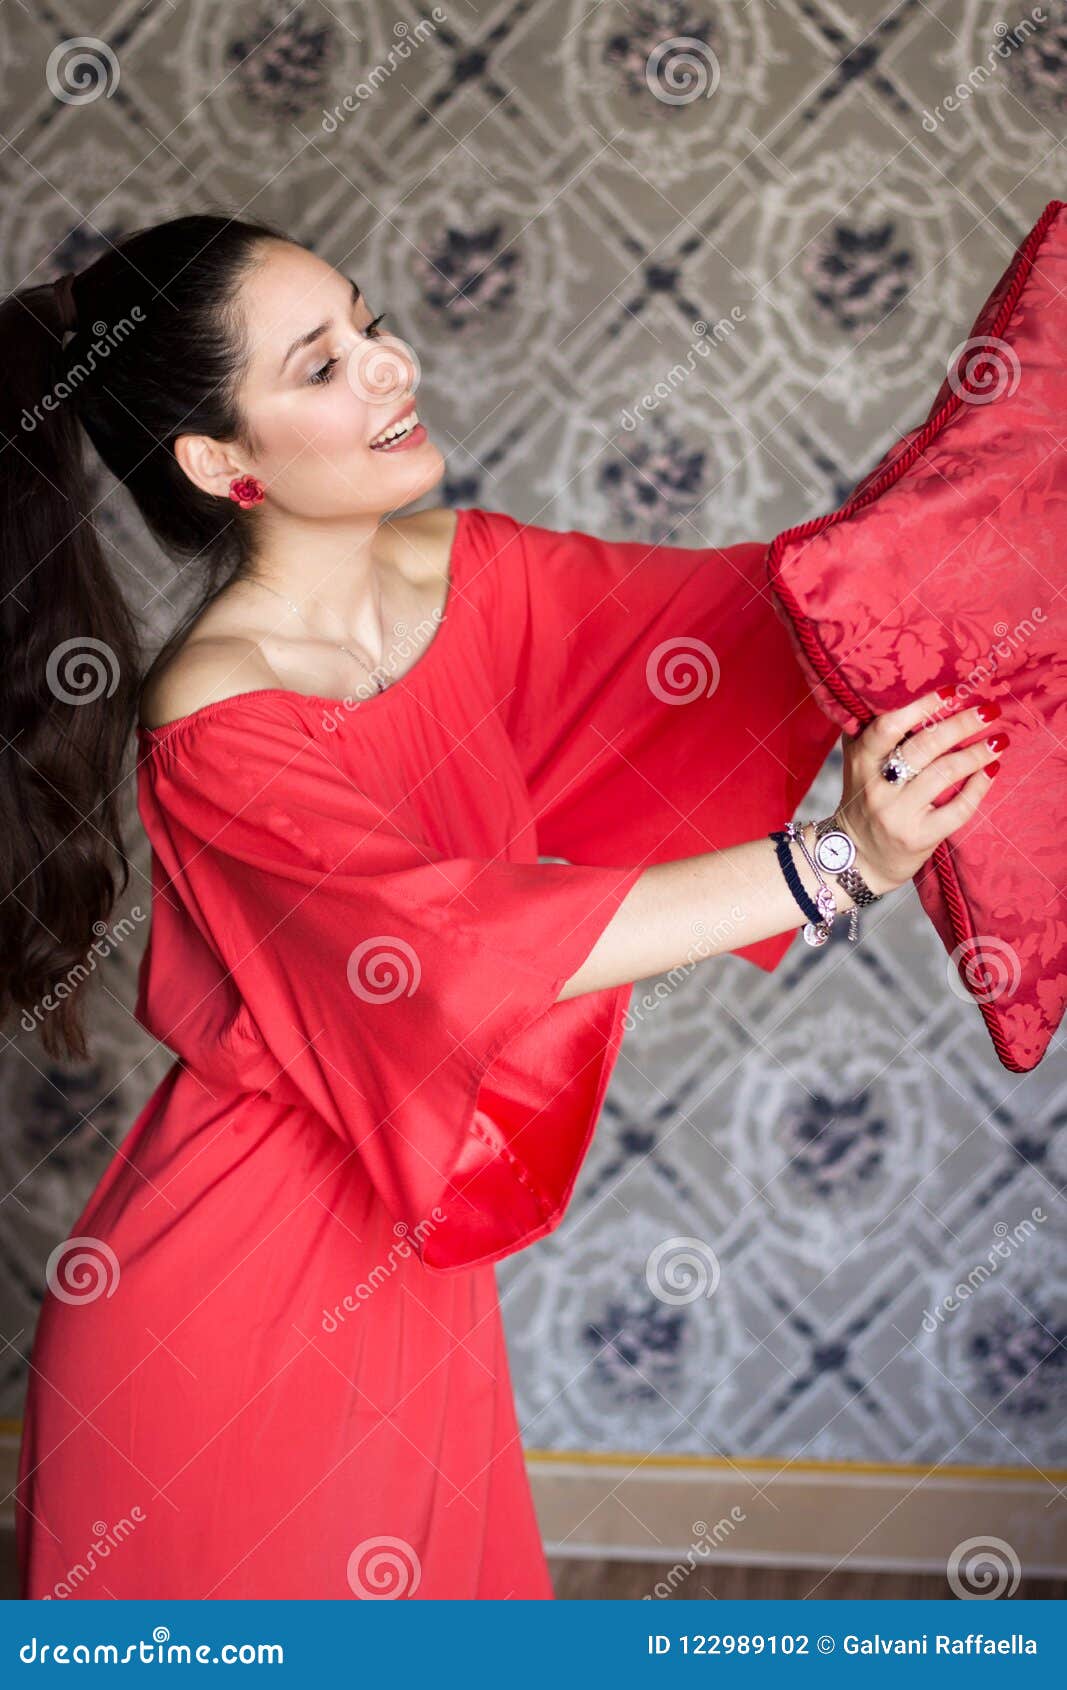 fashion model with red satin dress playing with a pillow